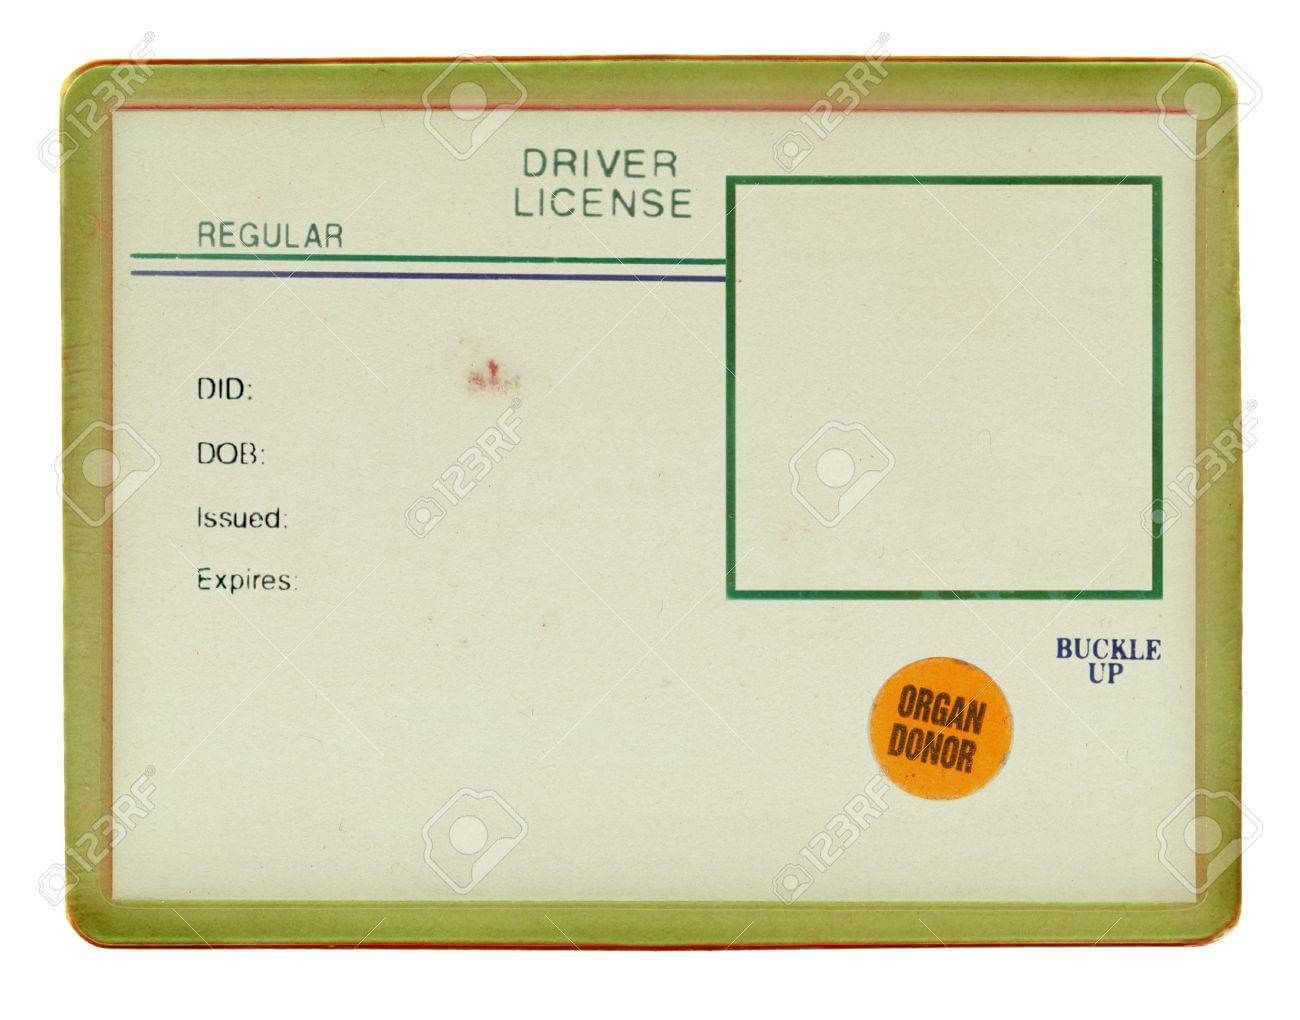 Blank Drivers License With Visible Old Paper Texture, Scratchs Throughout Blank Drivers License Template